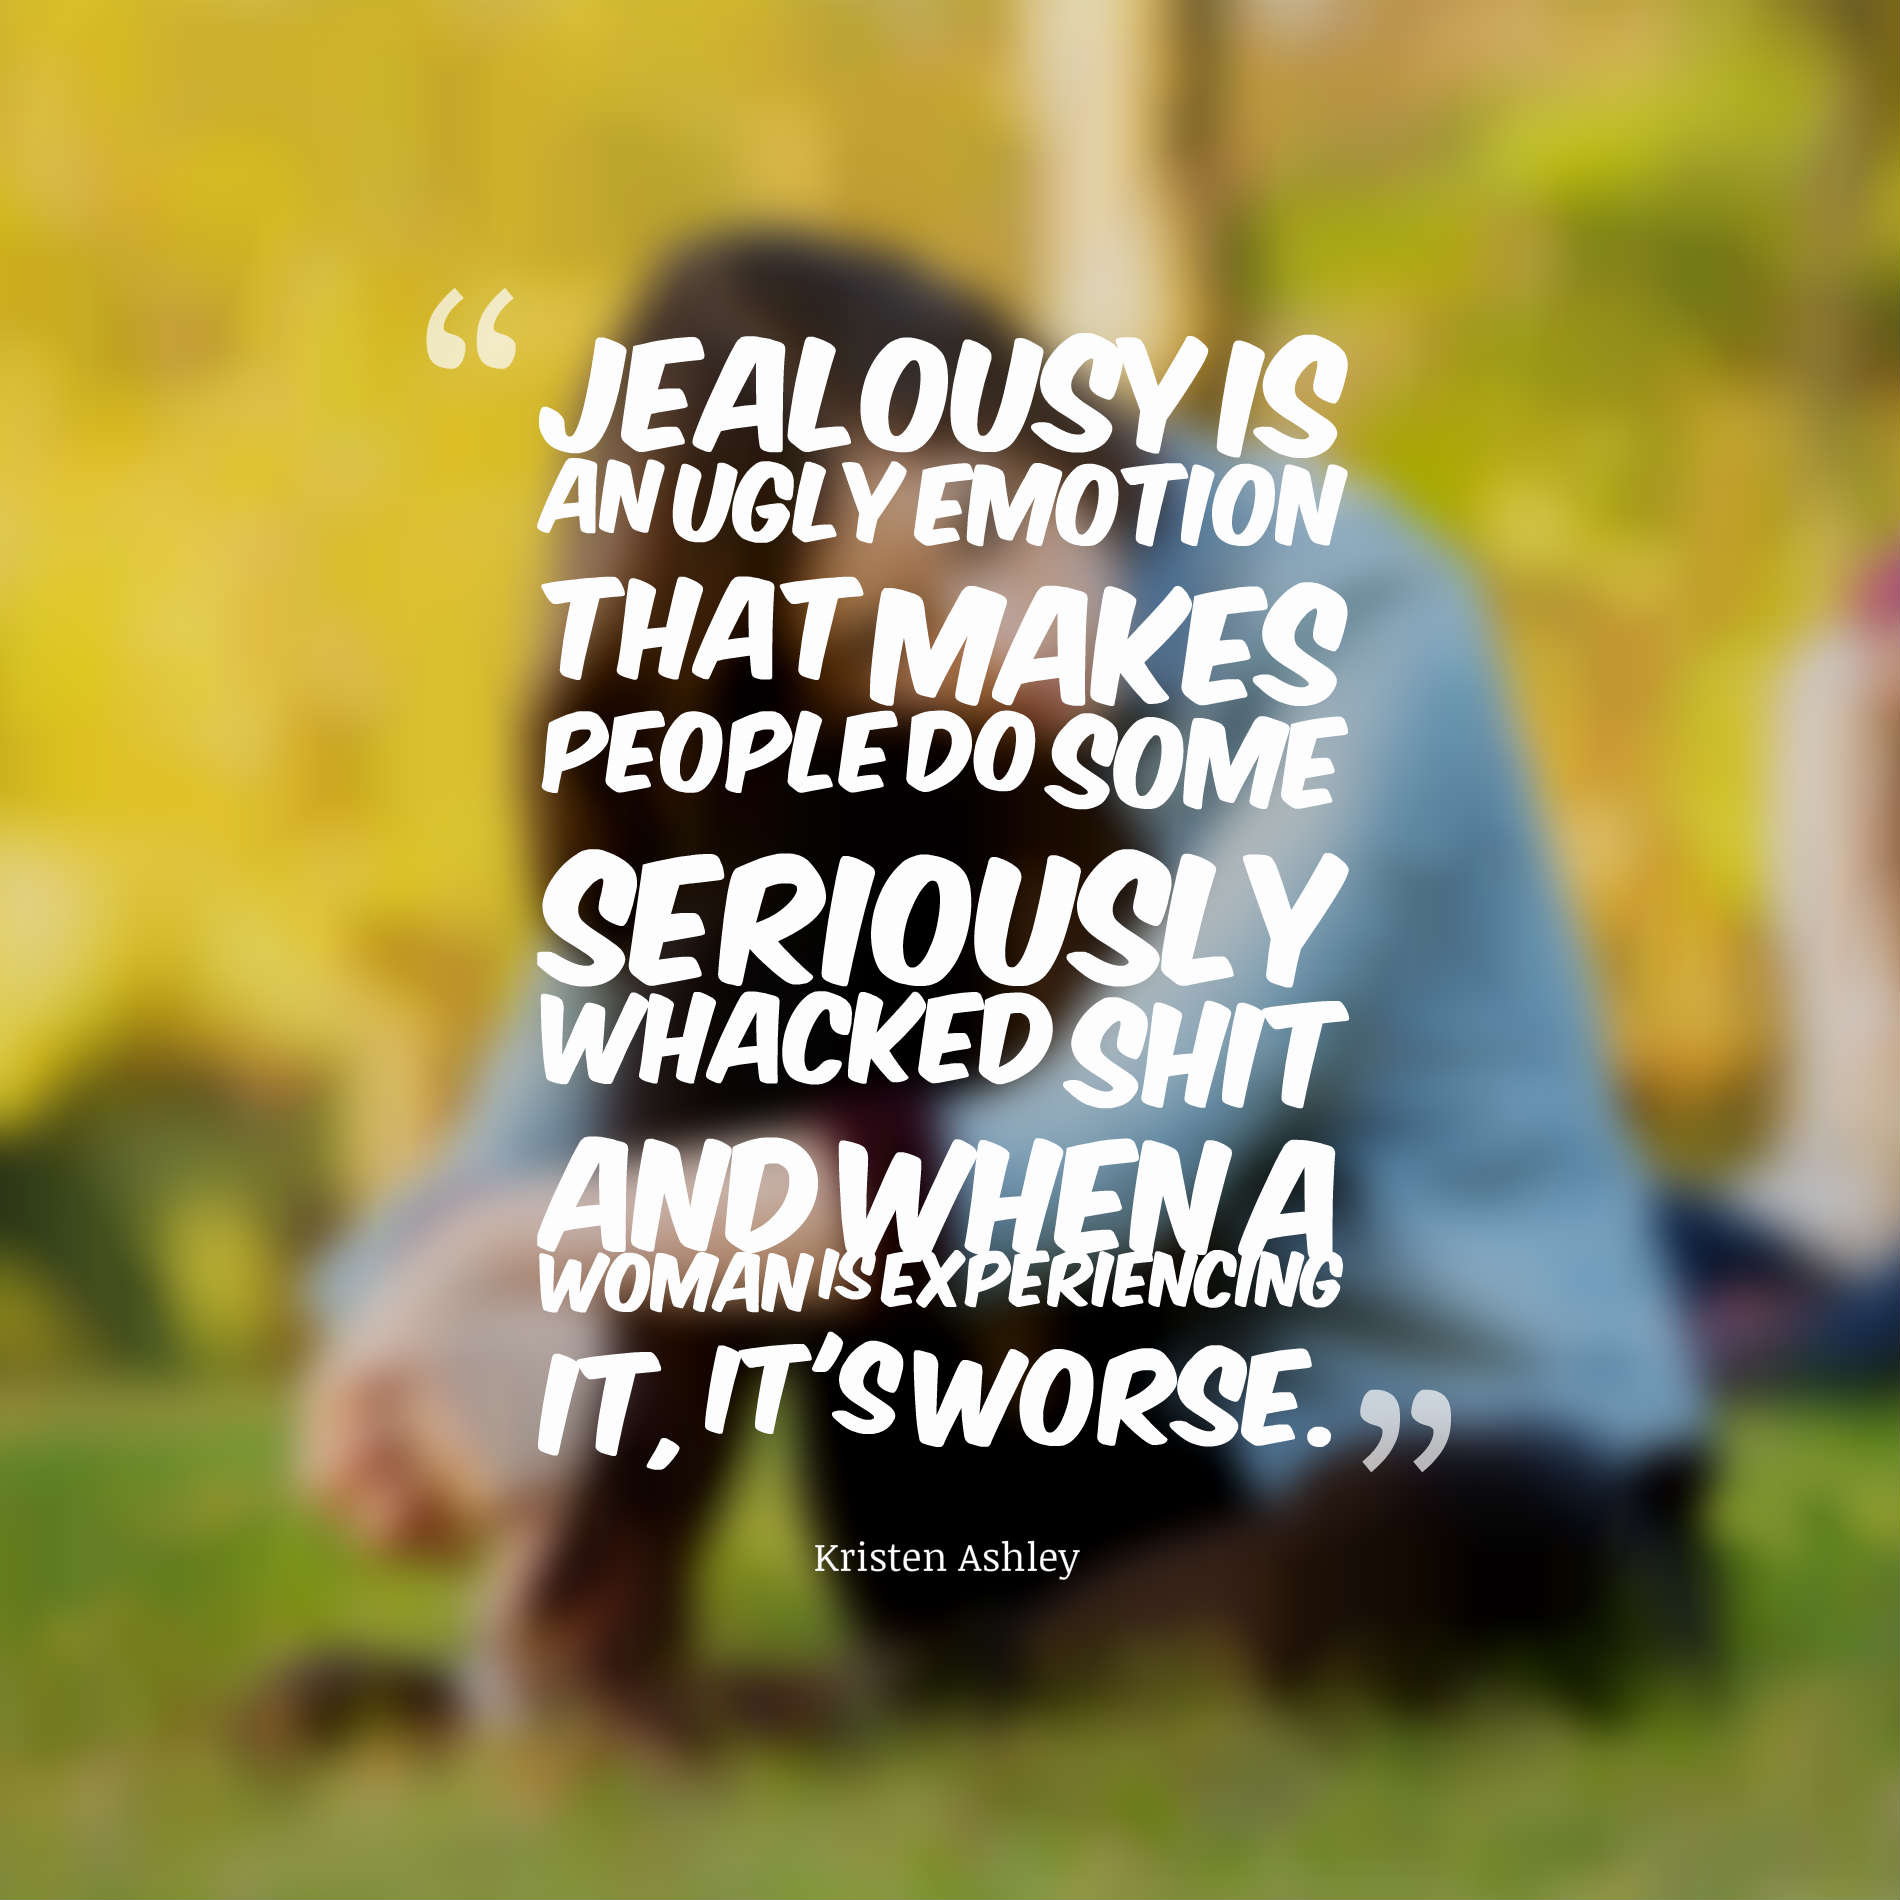 Jealousy is an ugly emotion that makes people do some seriously whacked shit and when a woman is experiencing it, it's worse.